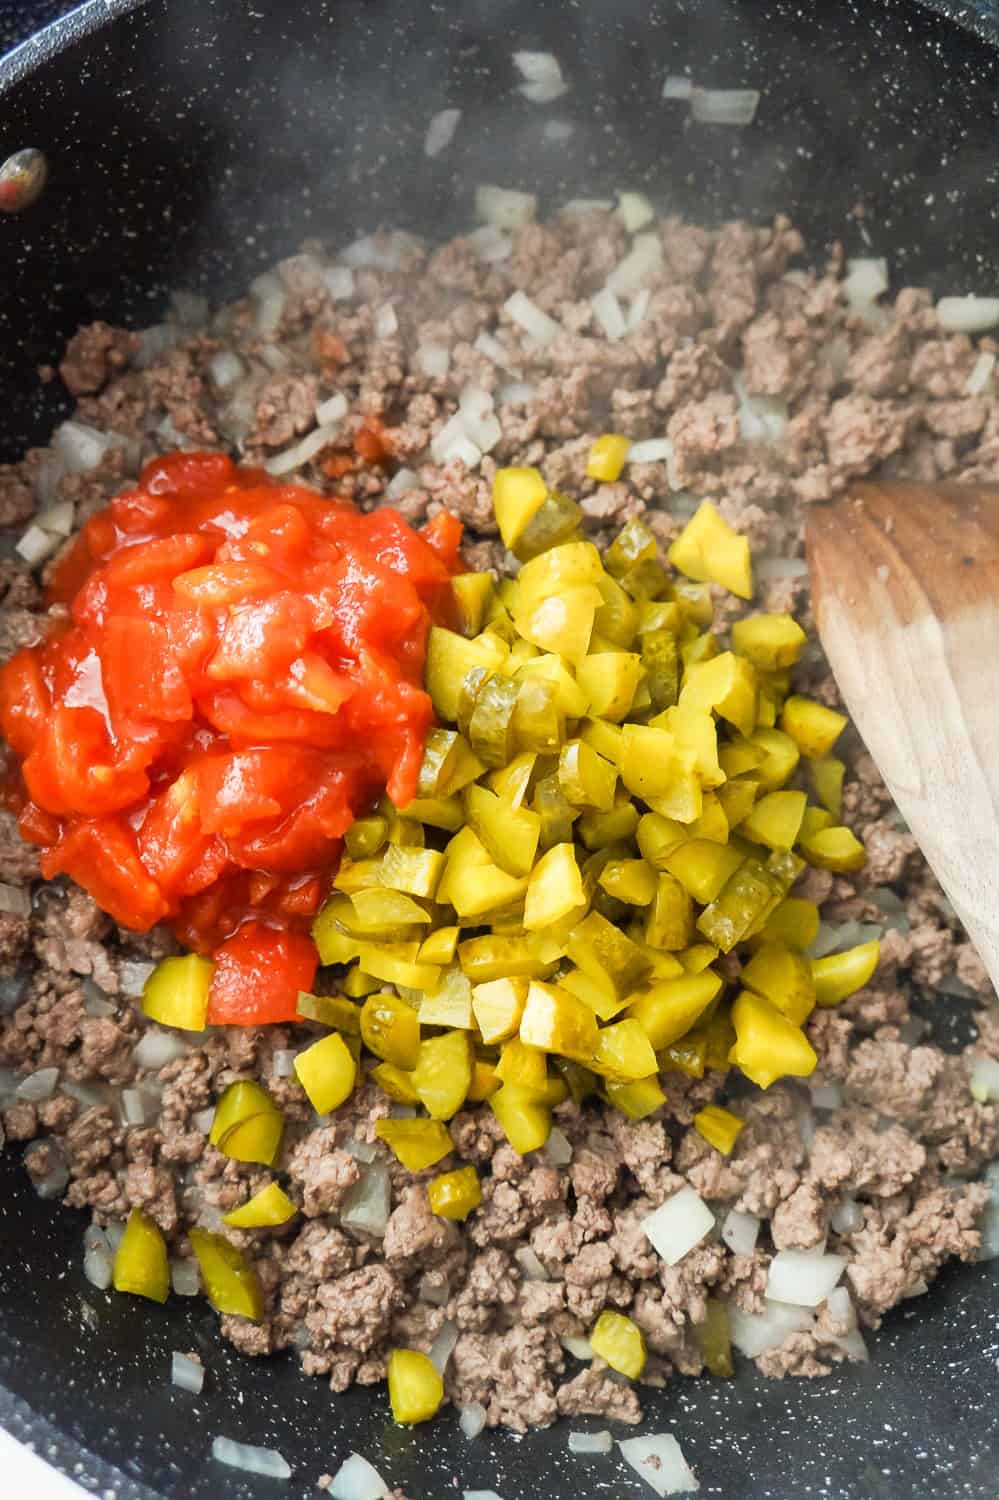 diced pickles and diced tomatoes on topped of cooked ground beef in a saute pan